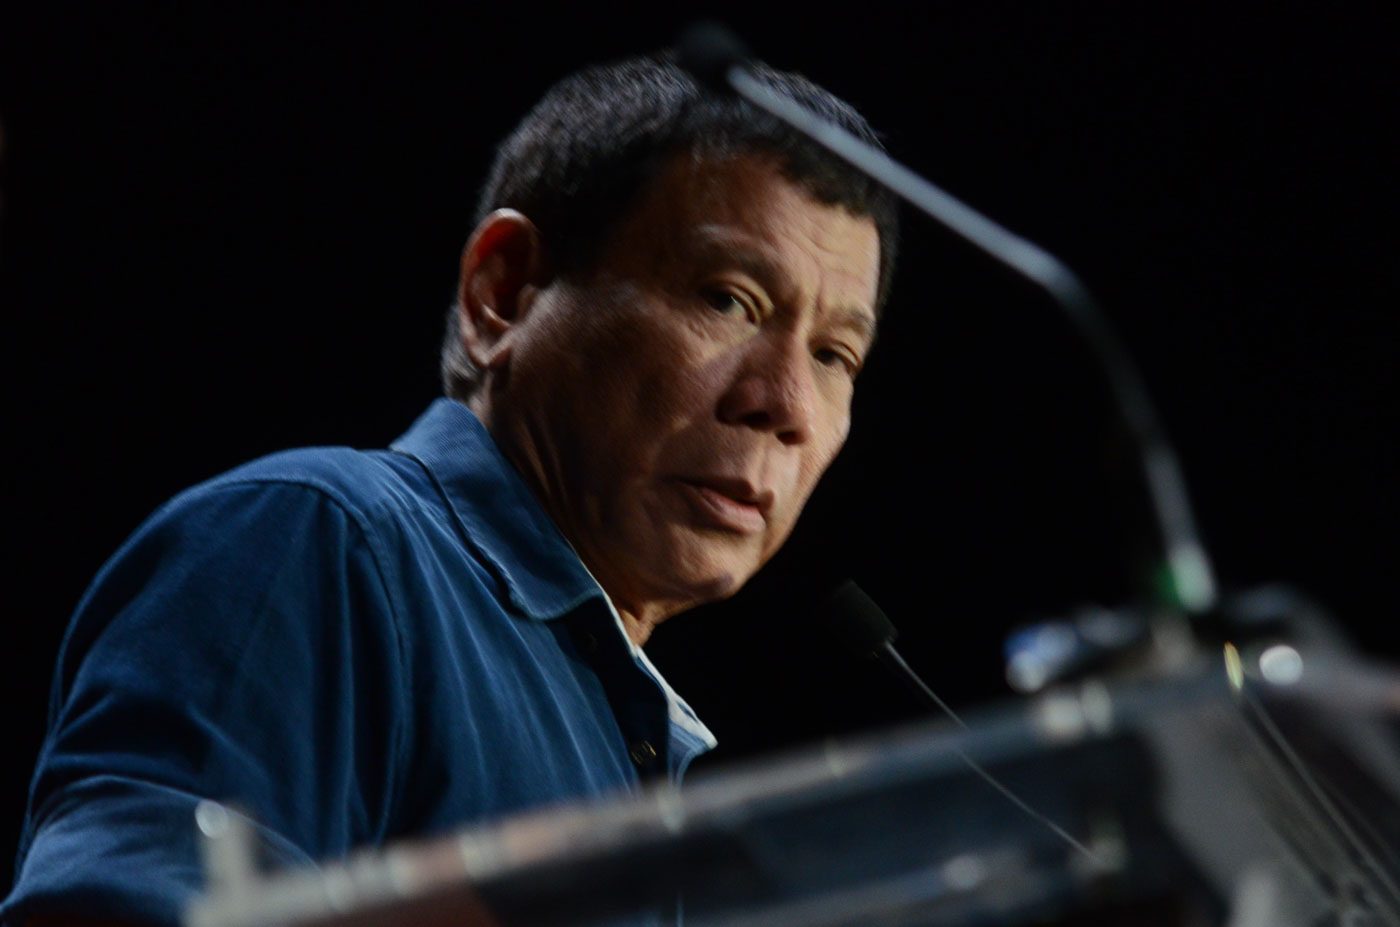 33 mayors in Duterte narco list to be stripped of police powers – DILG